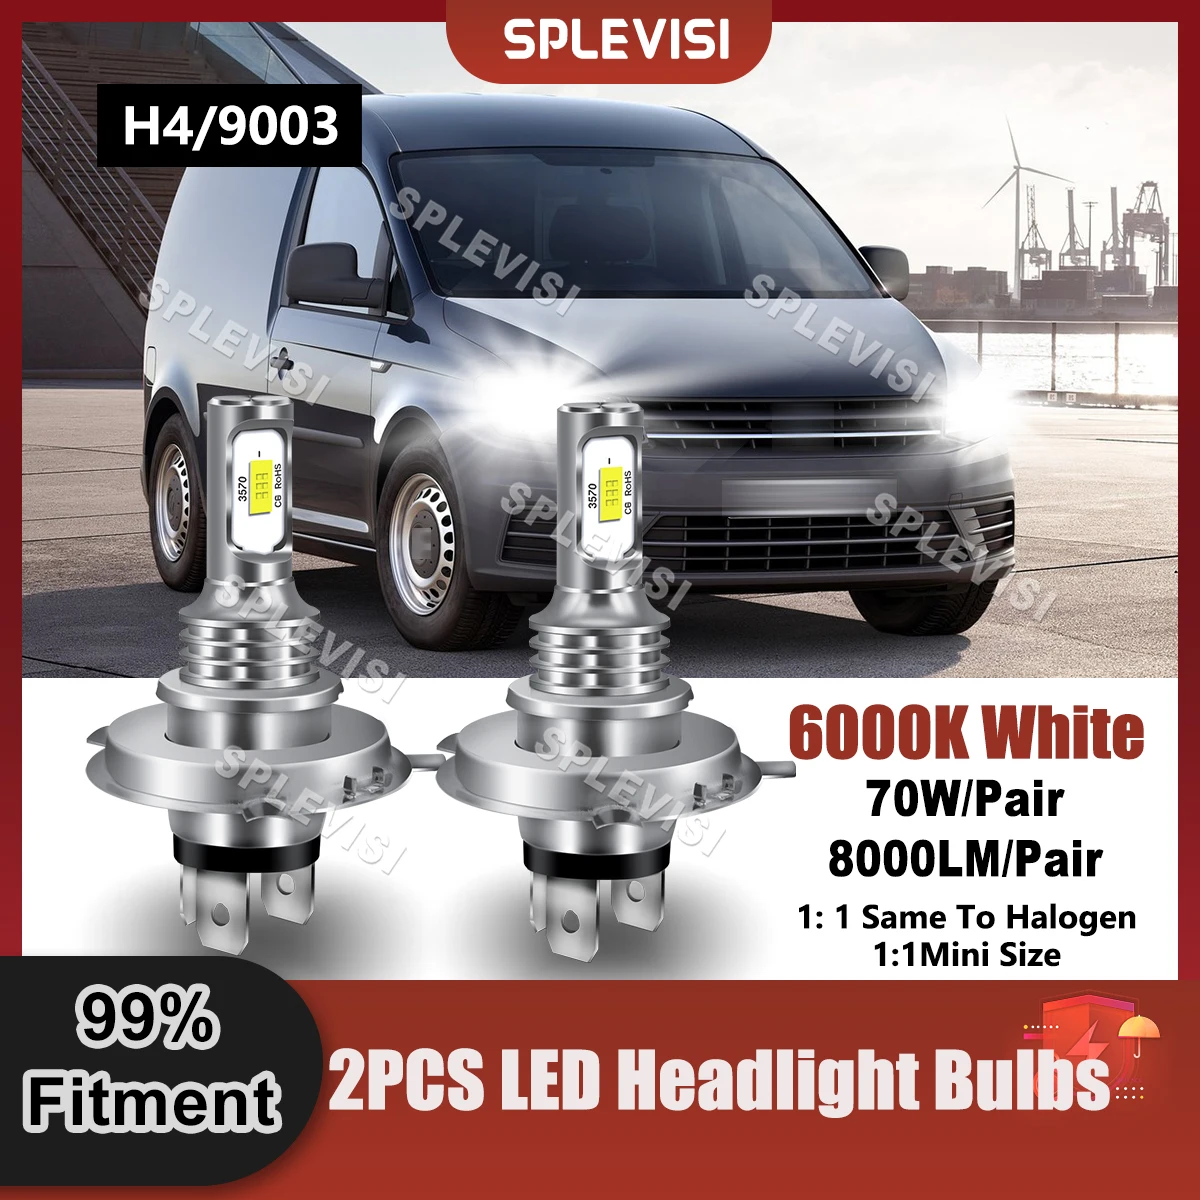 

A Pair LED H4/9003 High Low Beam 9V-24V 12x CSP Chips Compatible For VW Caddy MK4 2015 2016 2017 2018 Car Headlight Bulbs